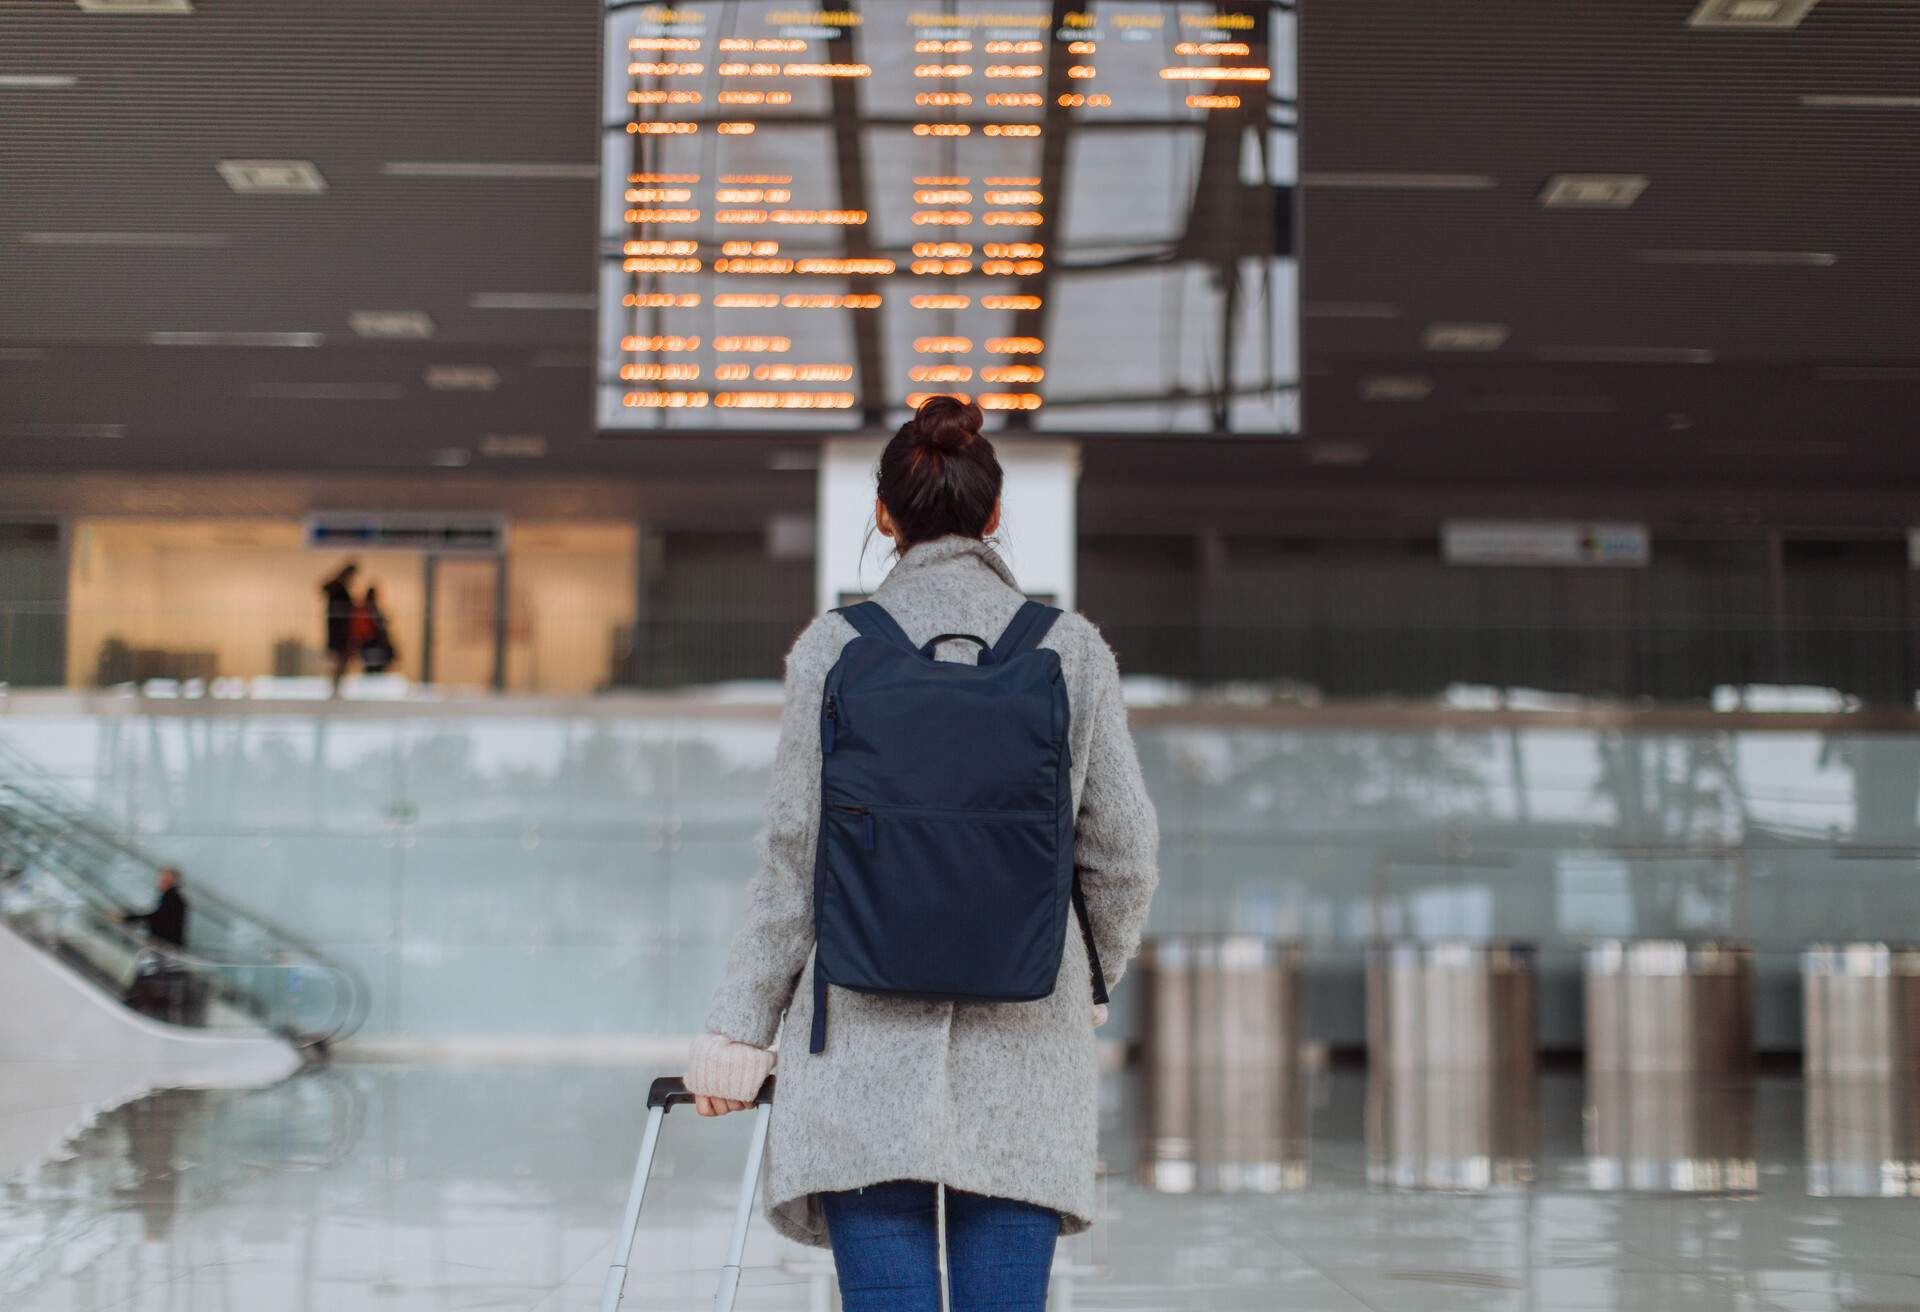 Woman at the airport, checking the arrival and departure boards for flight information while holding her luggage and carrying a backpack.